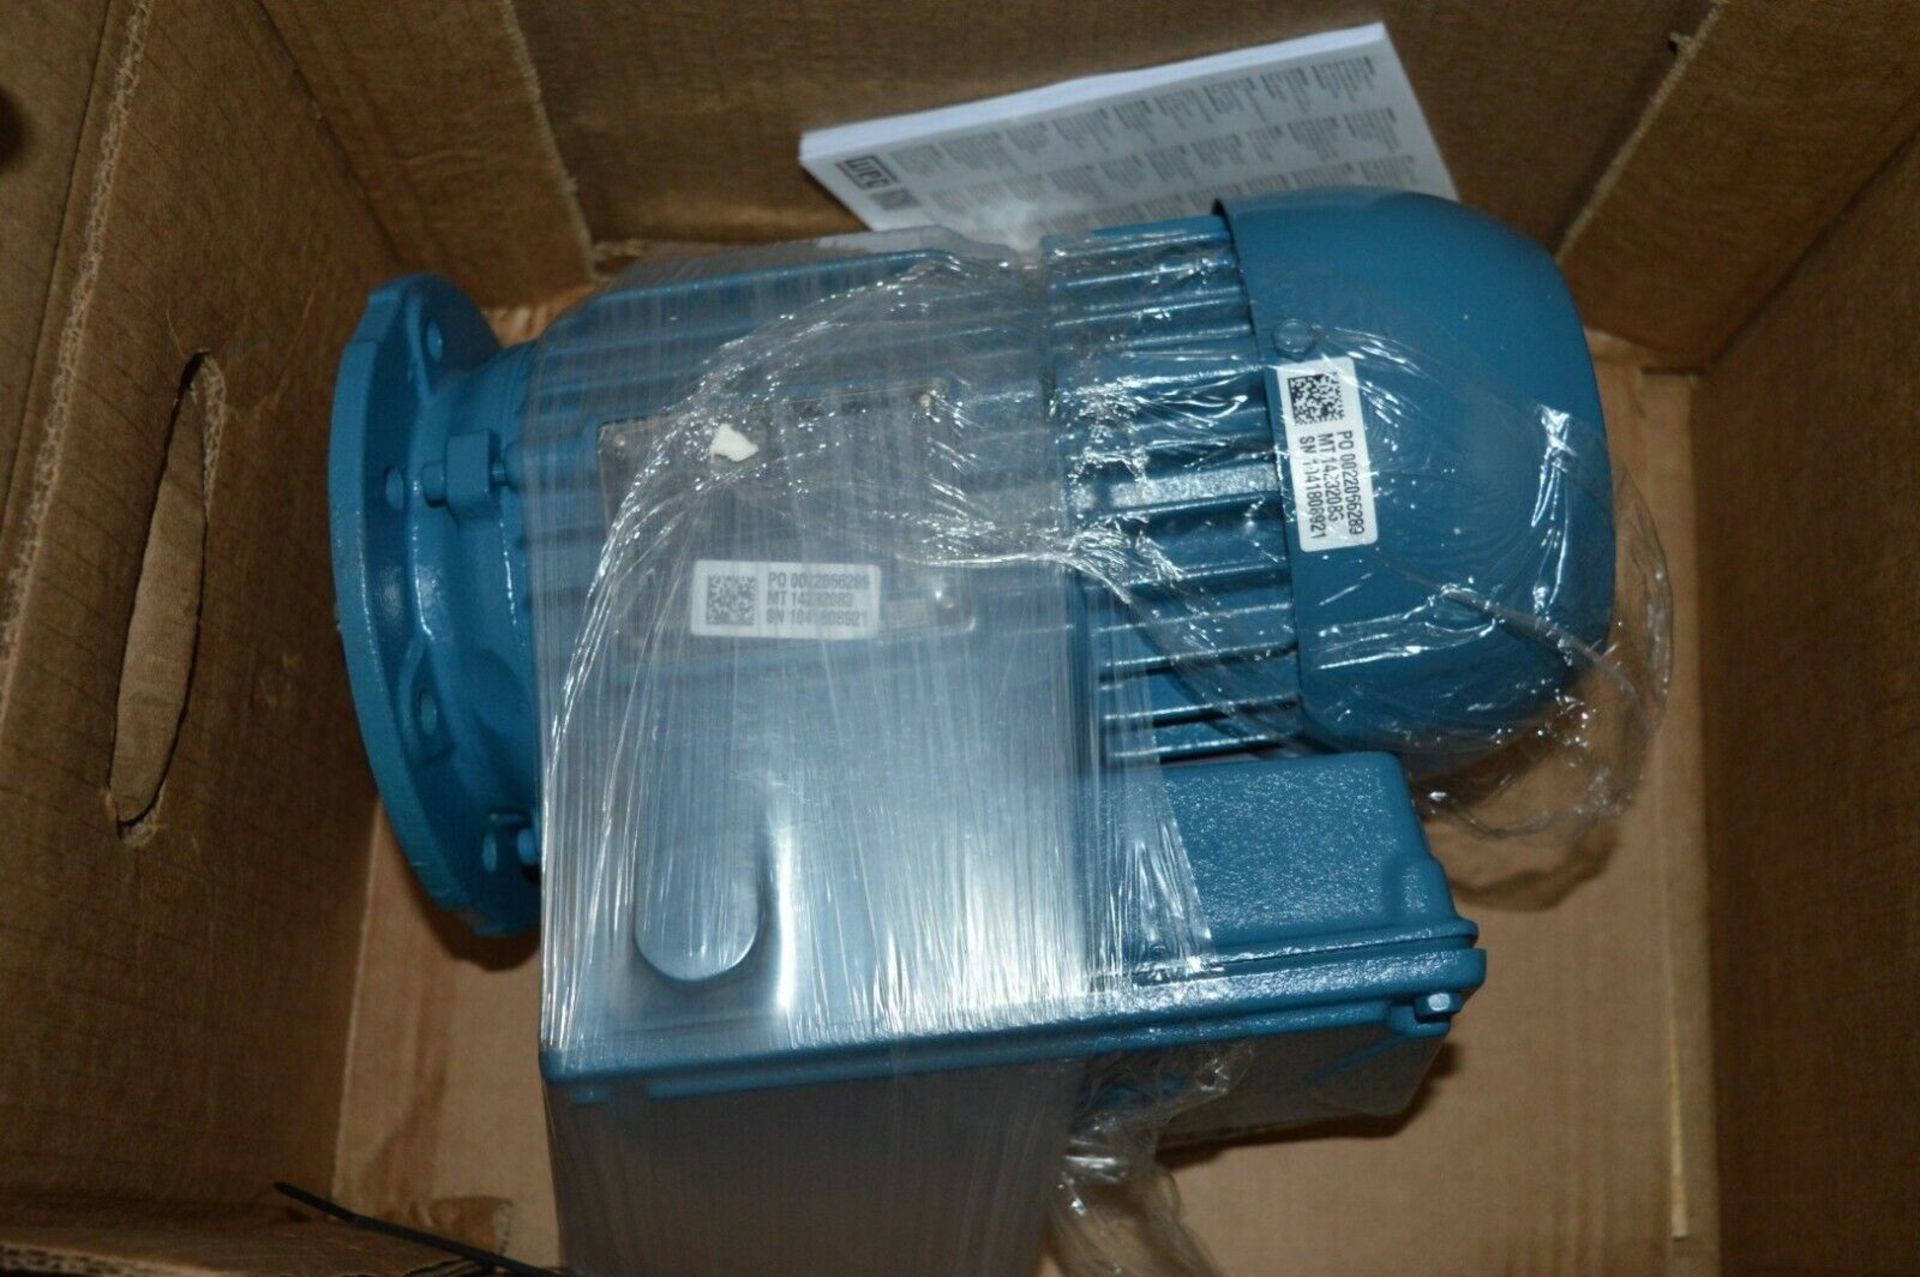 1 x Weg W22 110v IP55 Single Phase Electric Motor - Brand New and Boxed - CL295 - Location: - Image 5 of 7